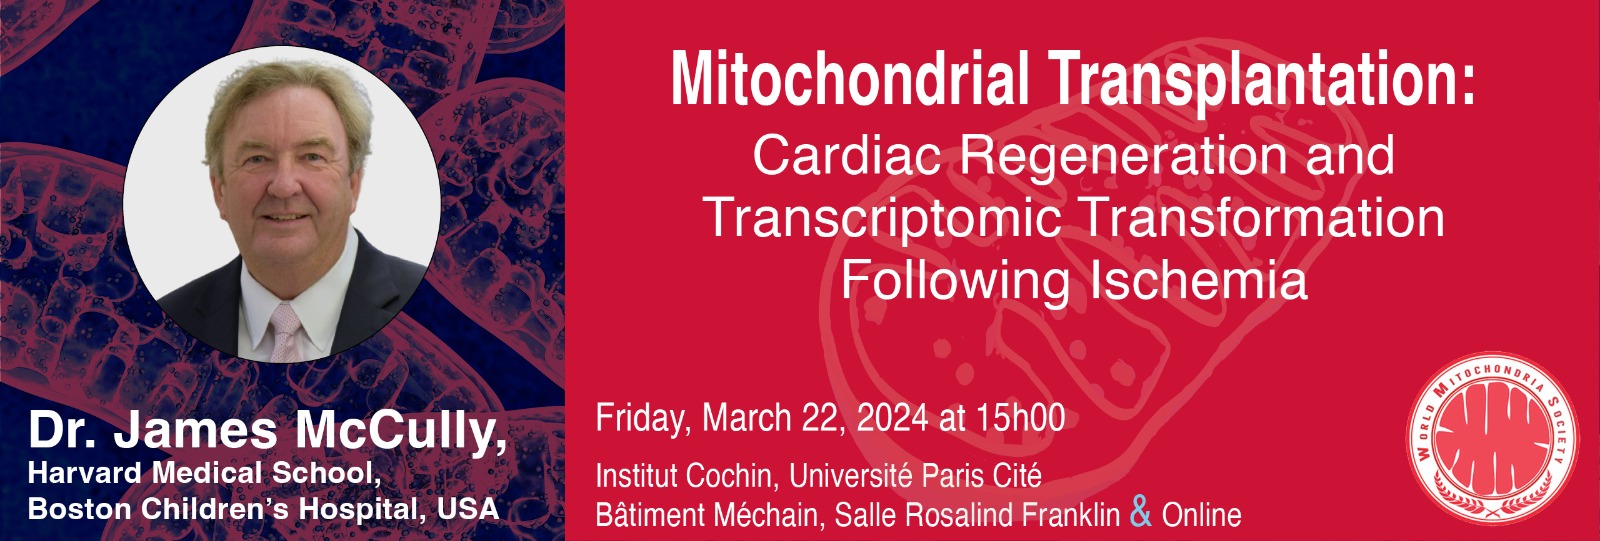 Dr. James McCully will be invited by Dr. Marvin Edeas to highlight Mitochondrial Transplantation on March 22